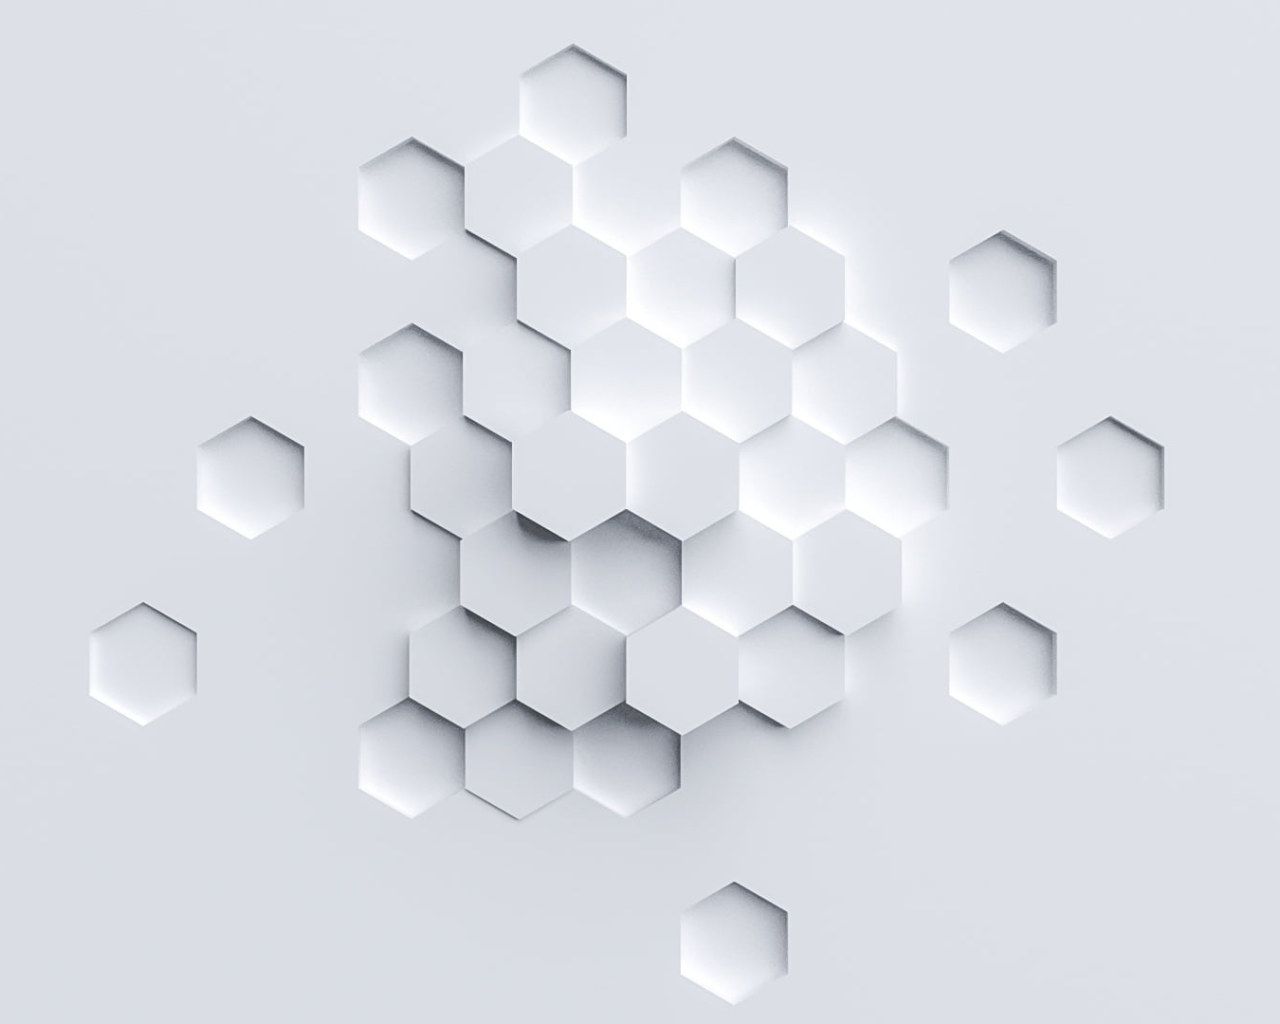 Minimal wallpaper, abstract, hexagon, simple, minimalism, white color • Wallpaper For You HD Wallpaper For Desktop & Mobile